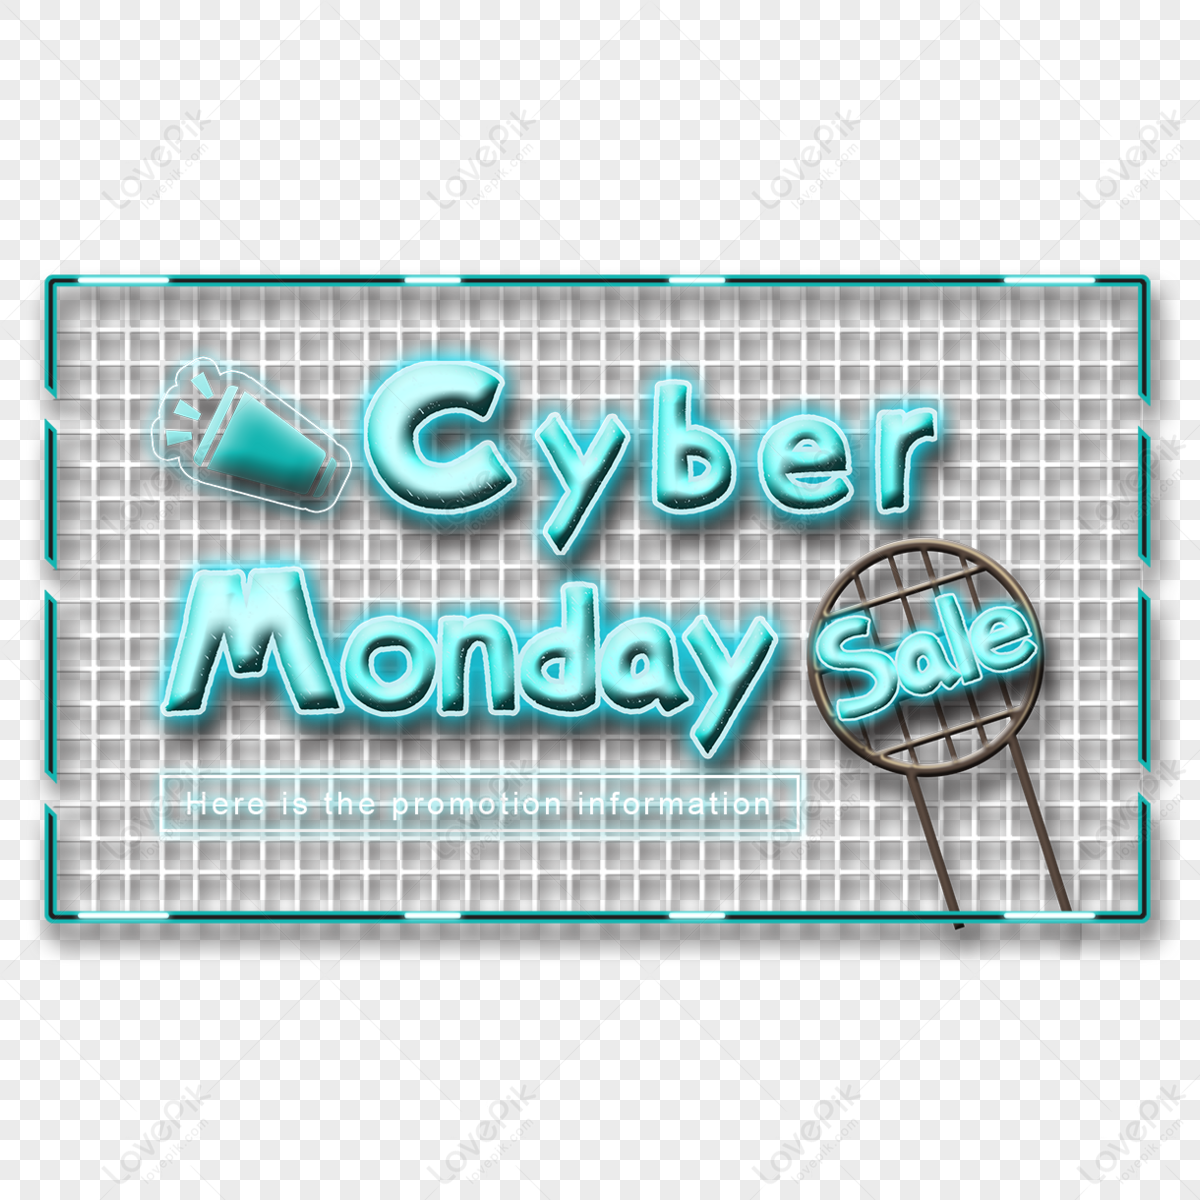 Cyber Monday Sale Logo PNG Vector (EPS) Free Download